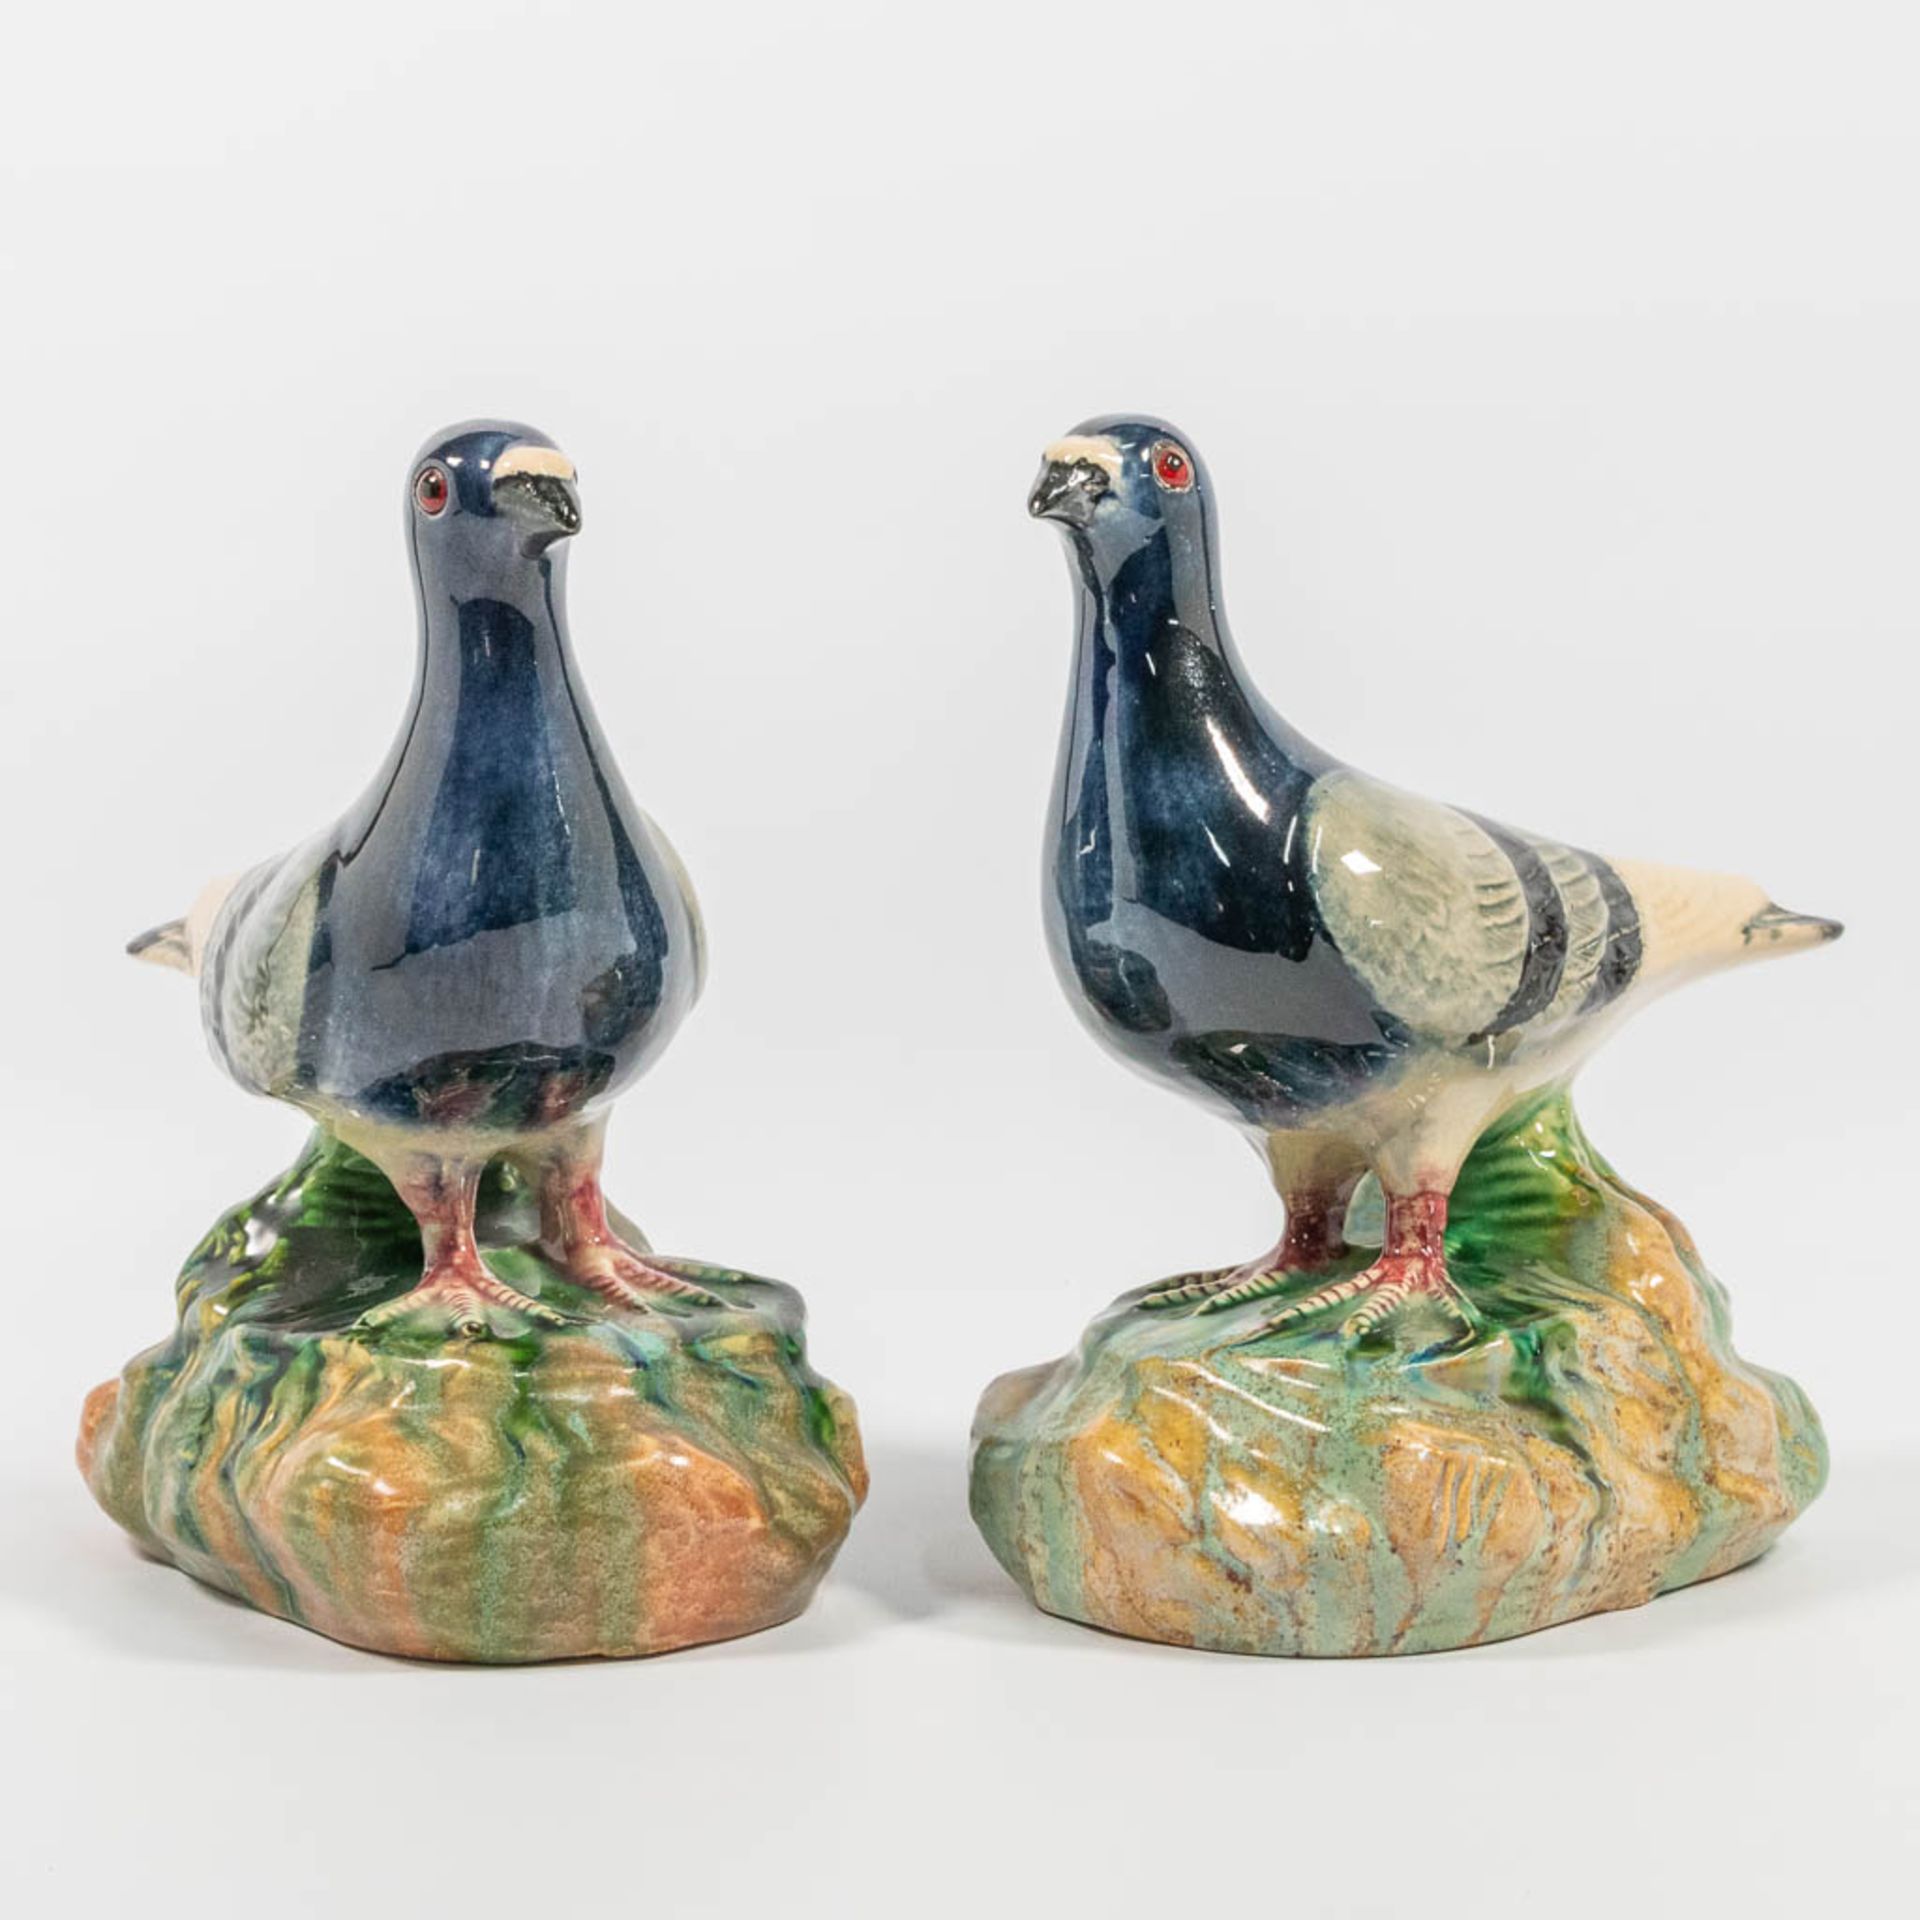 A pair of pigeons, made of ceramic, probably of Italian origin. (21 x 23 x 12)